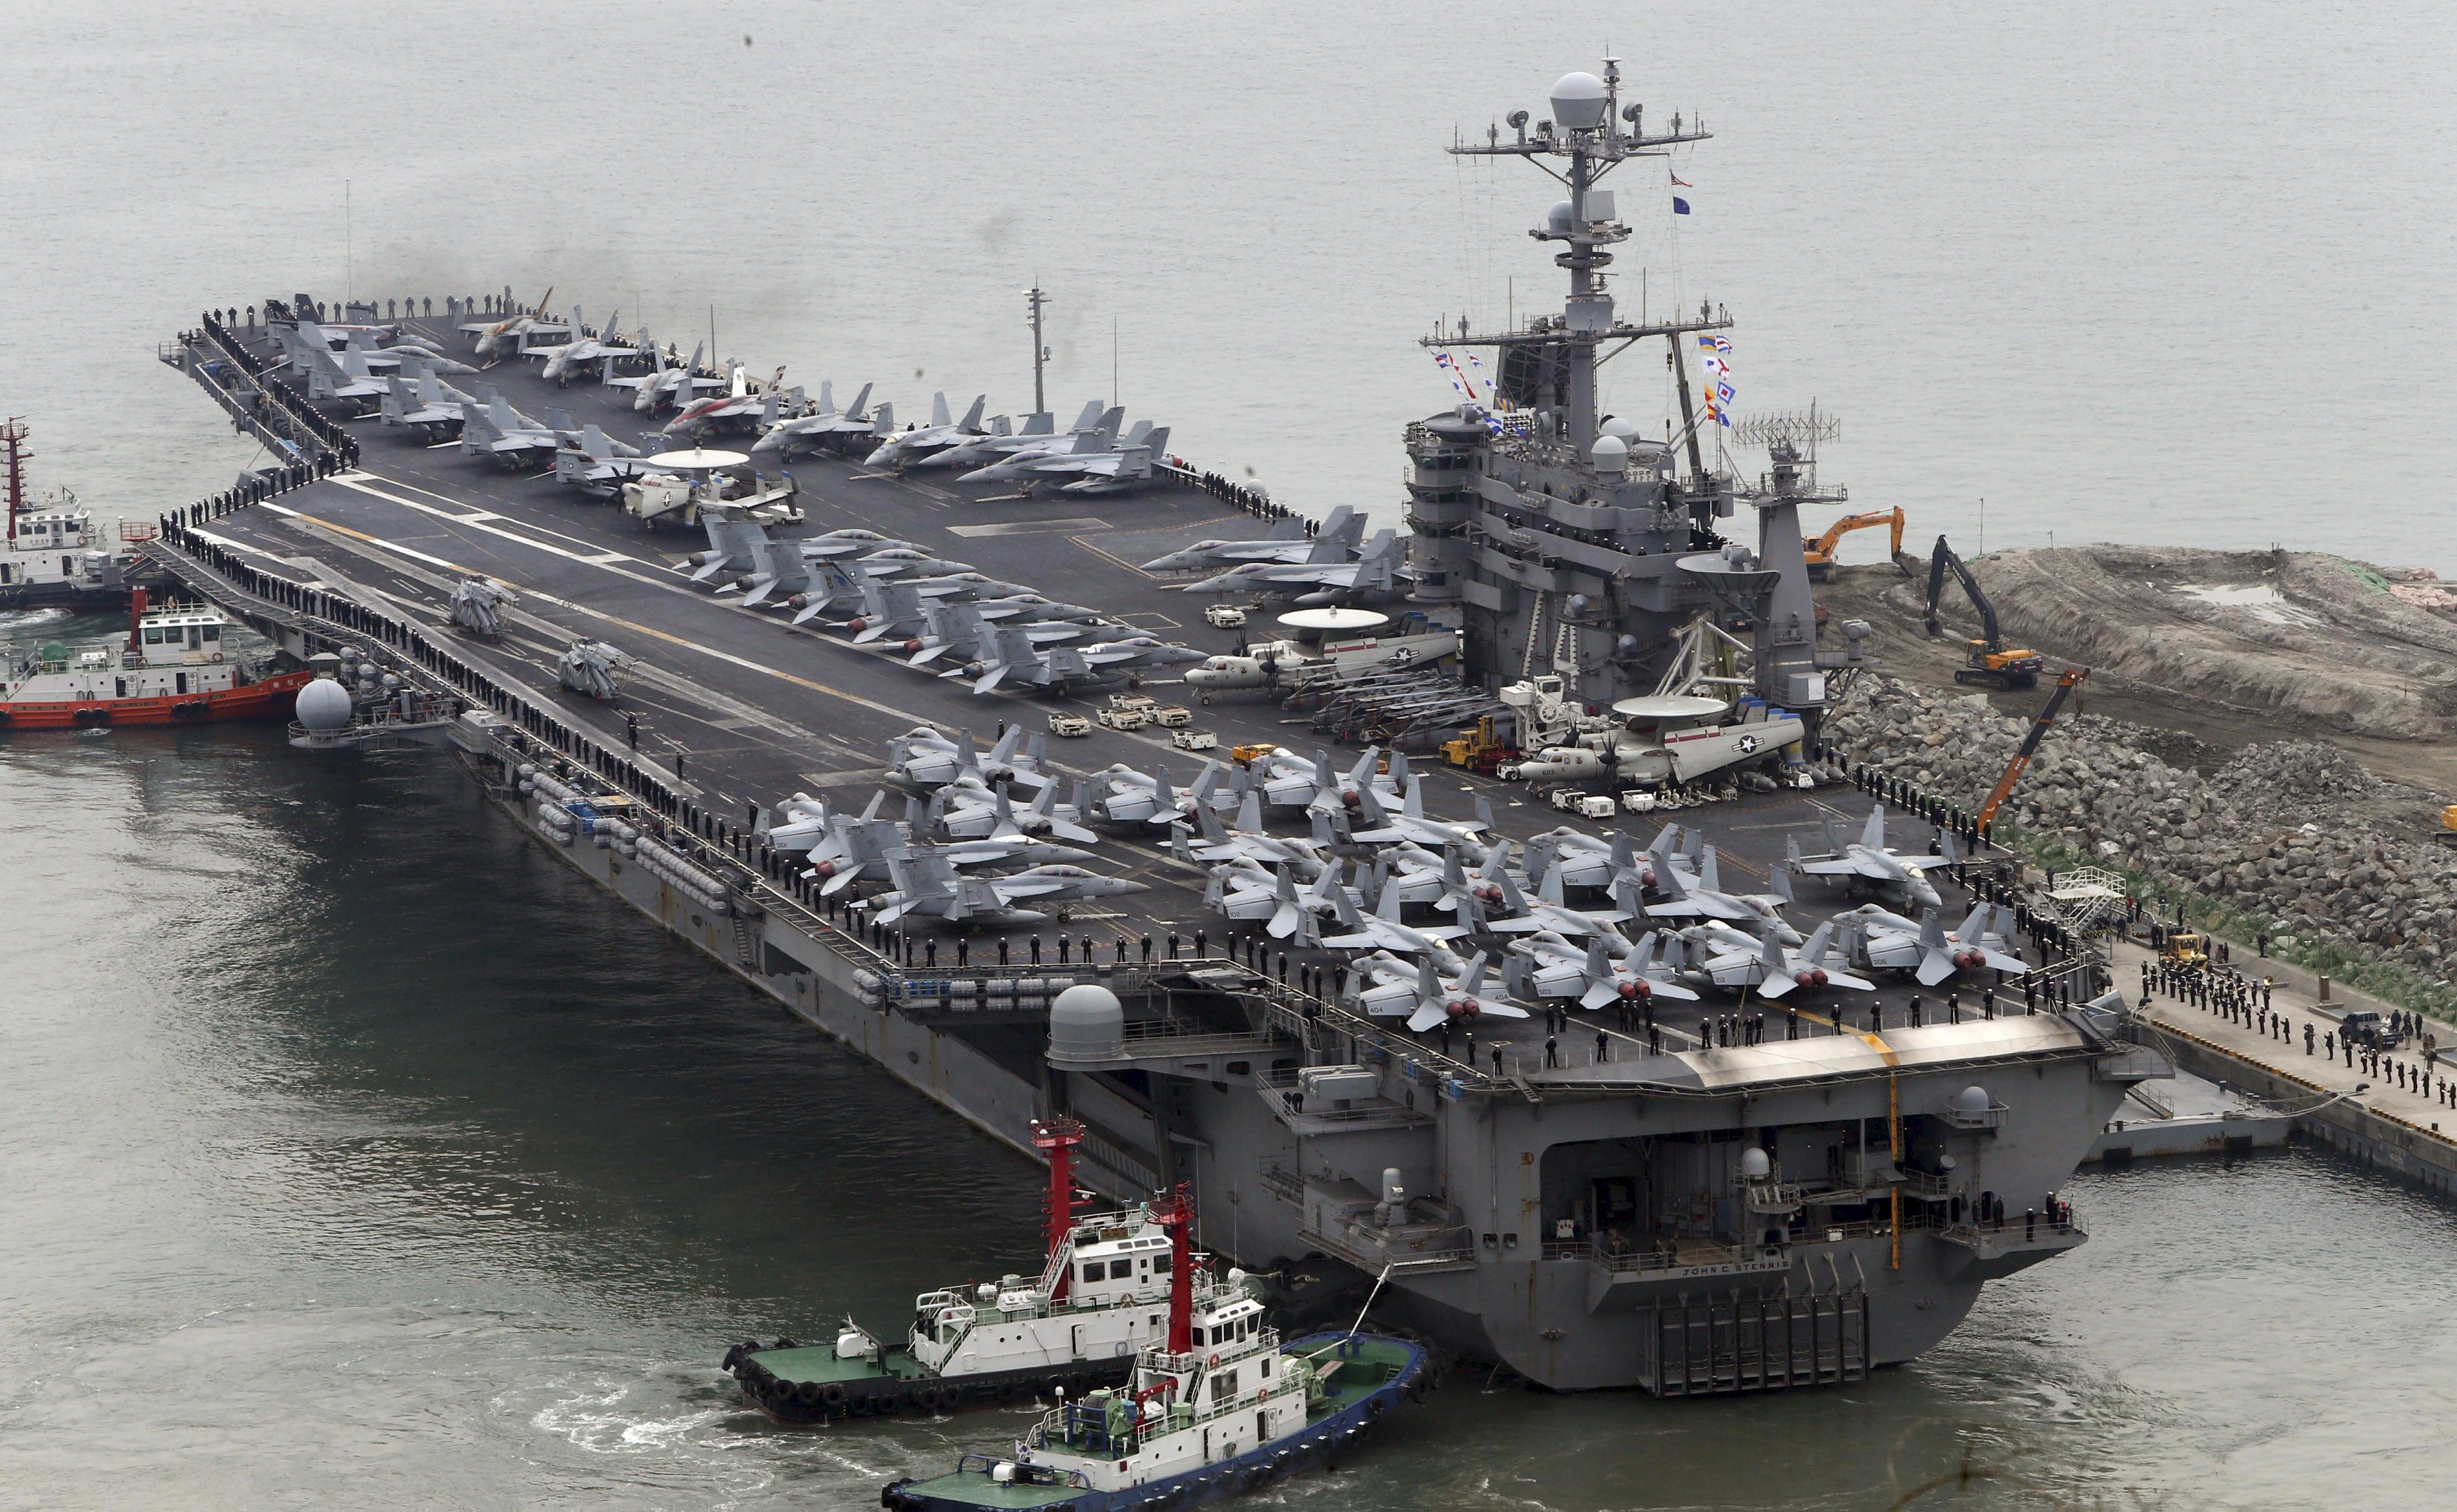 The Nimitz-class aircraft carrier USS John C. Stennis arrives in Busan, South Korea, on Sunday, ahead of the annual Key Resolve military exercise conducted by South Korean and U.S. forces. | REUTERS